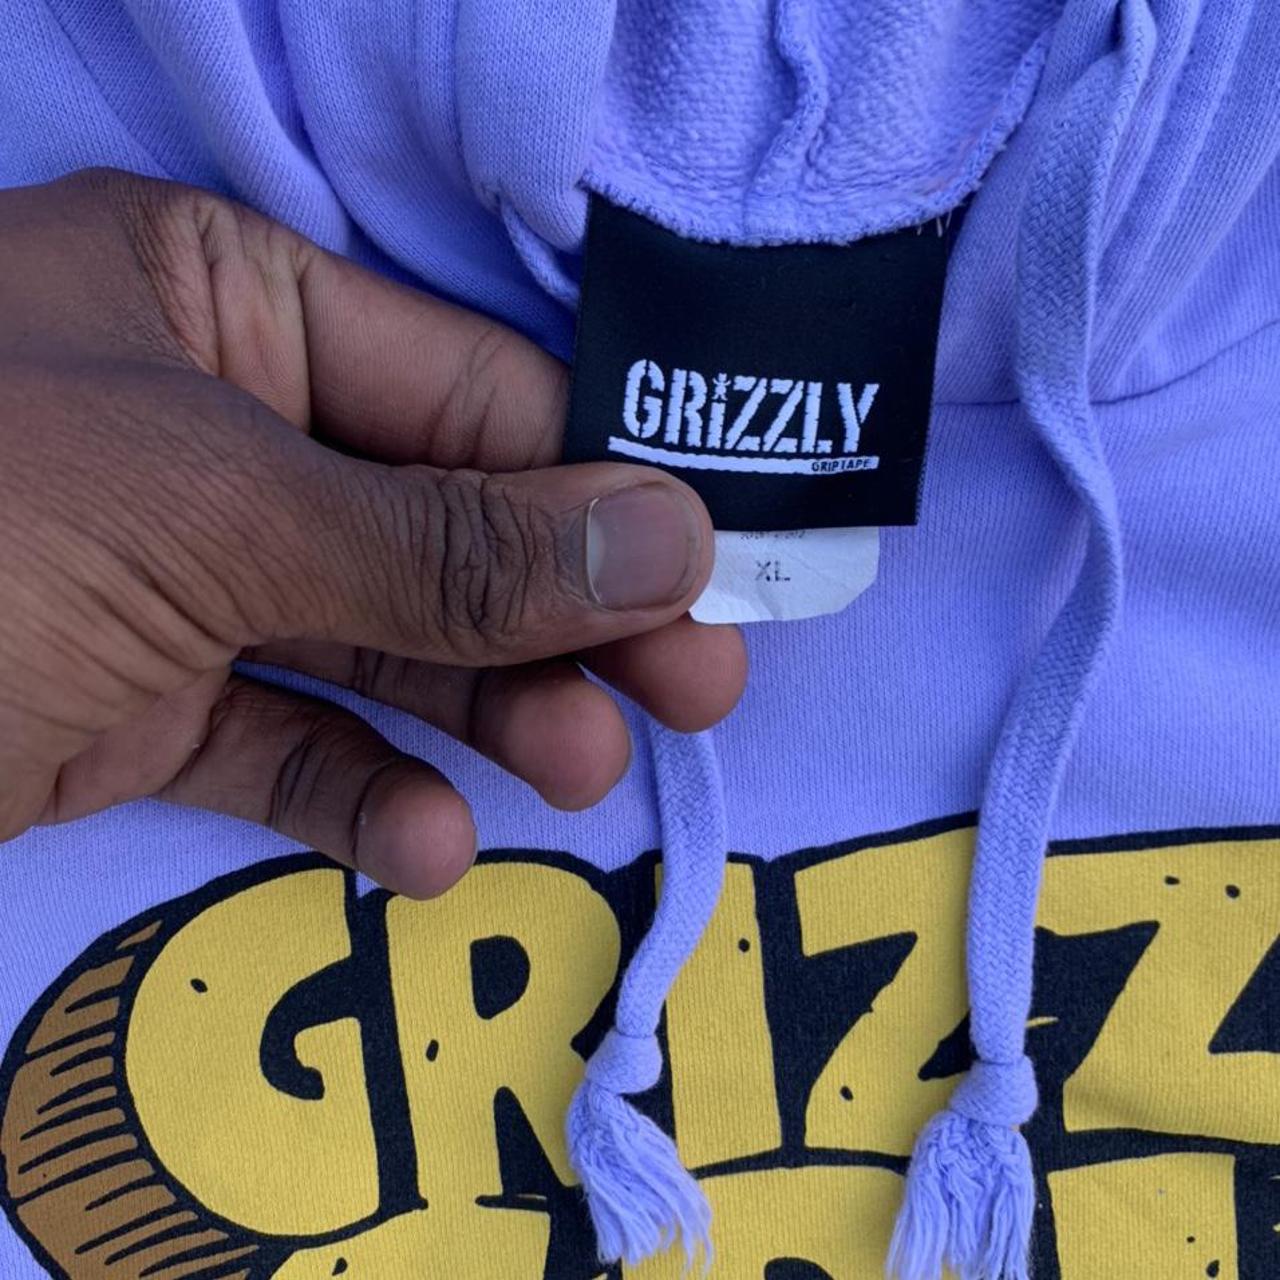 Product Image 3 - Lilac Grizzly Grip Tape Hoodie

Model